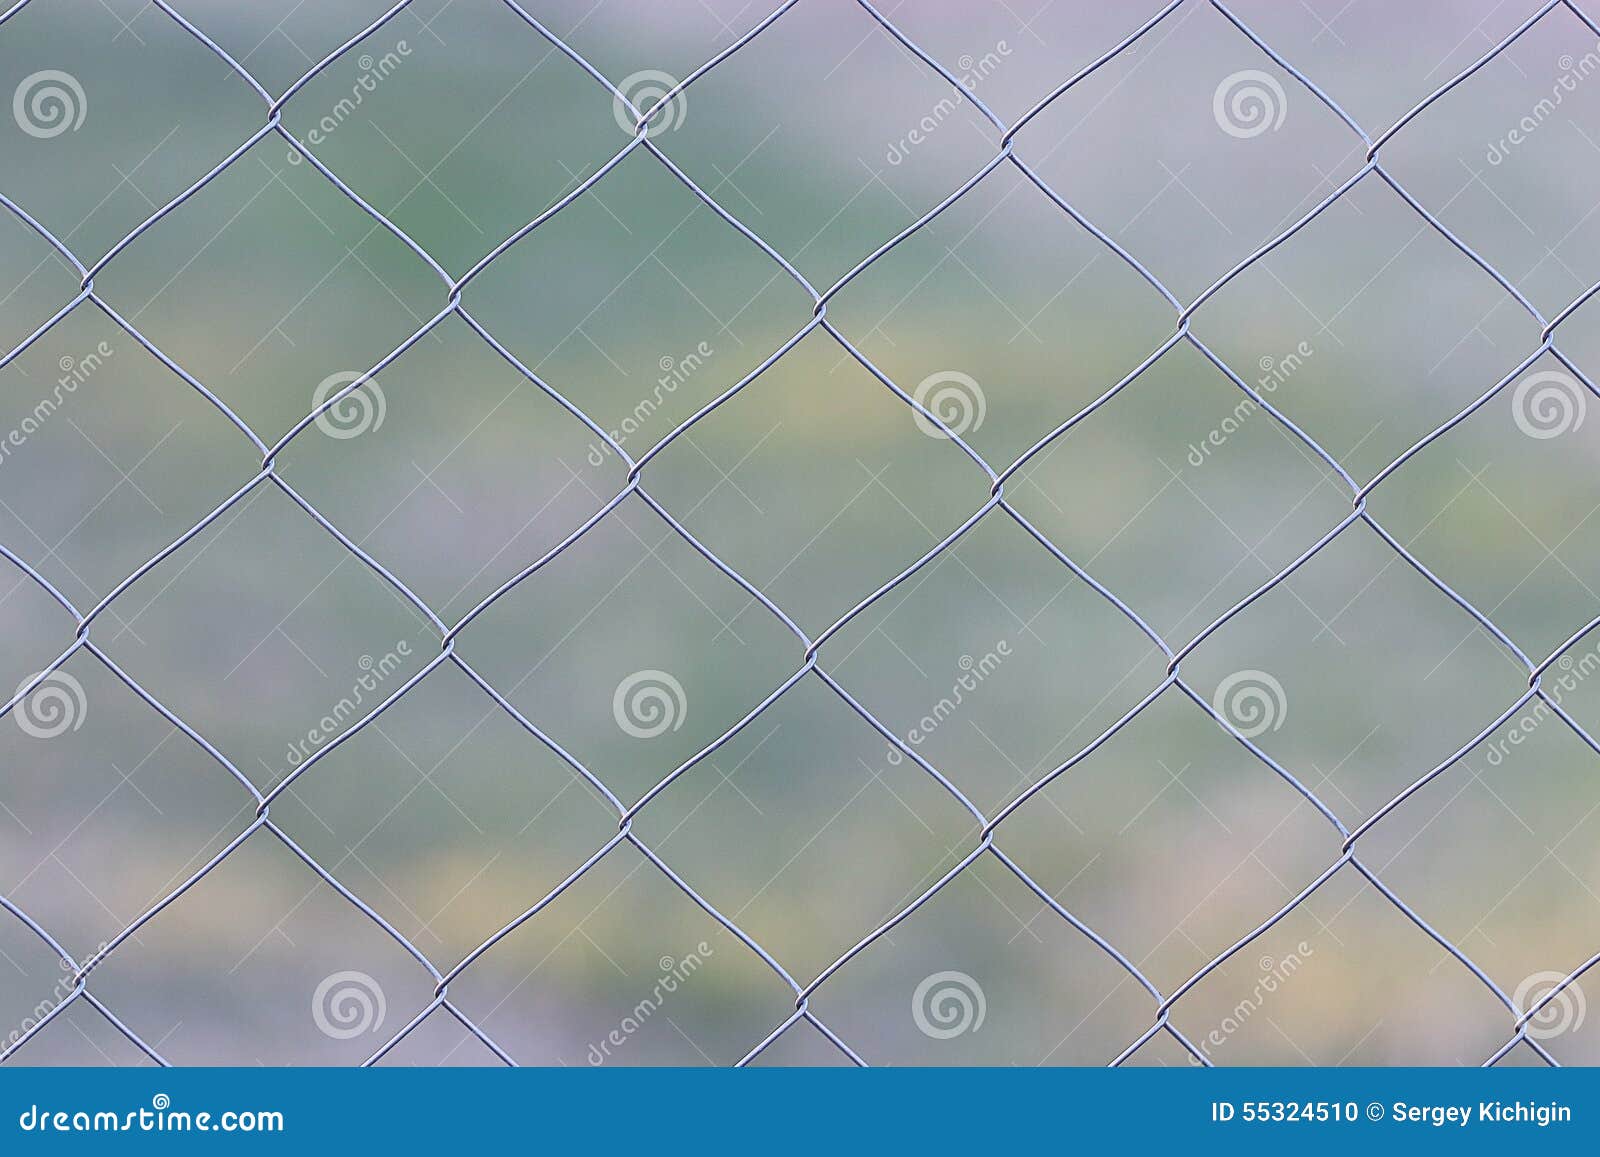 Wire metal netting fence stock photo. Image of circle - 55324510
